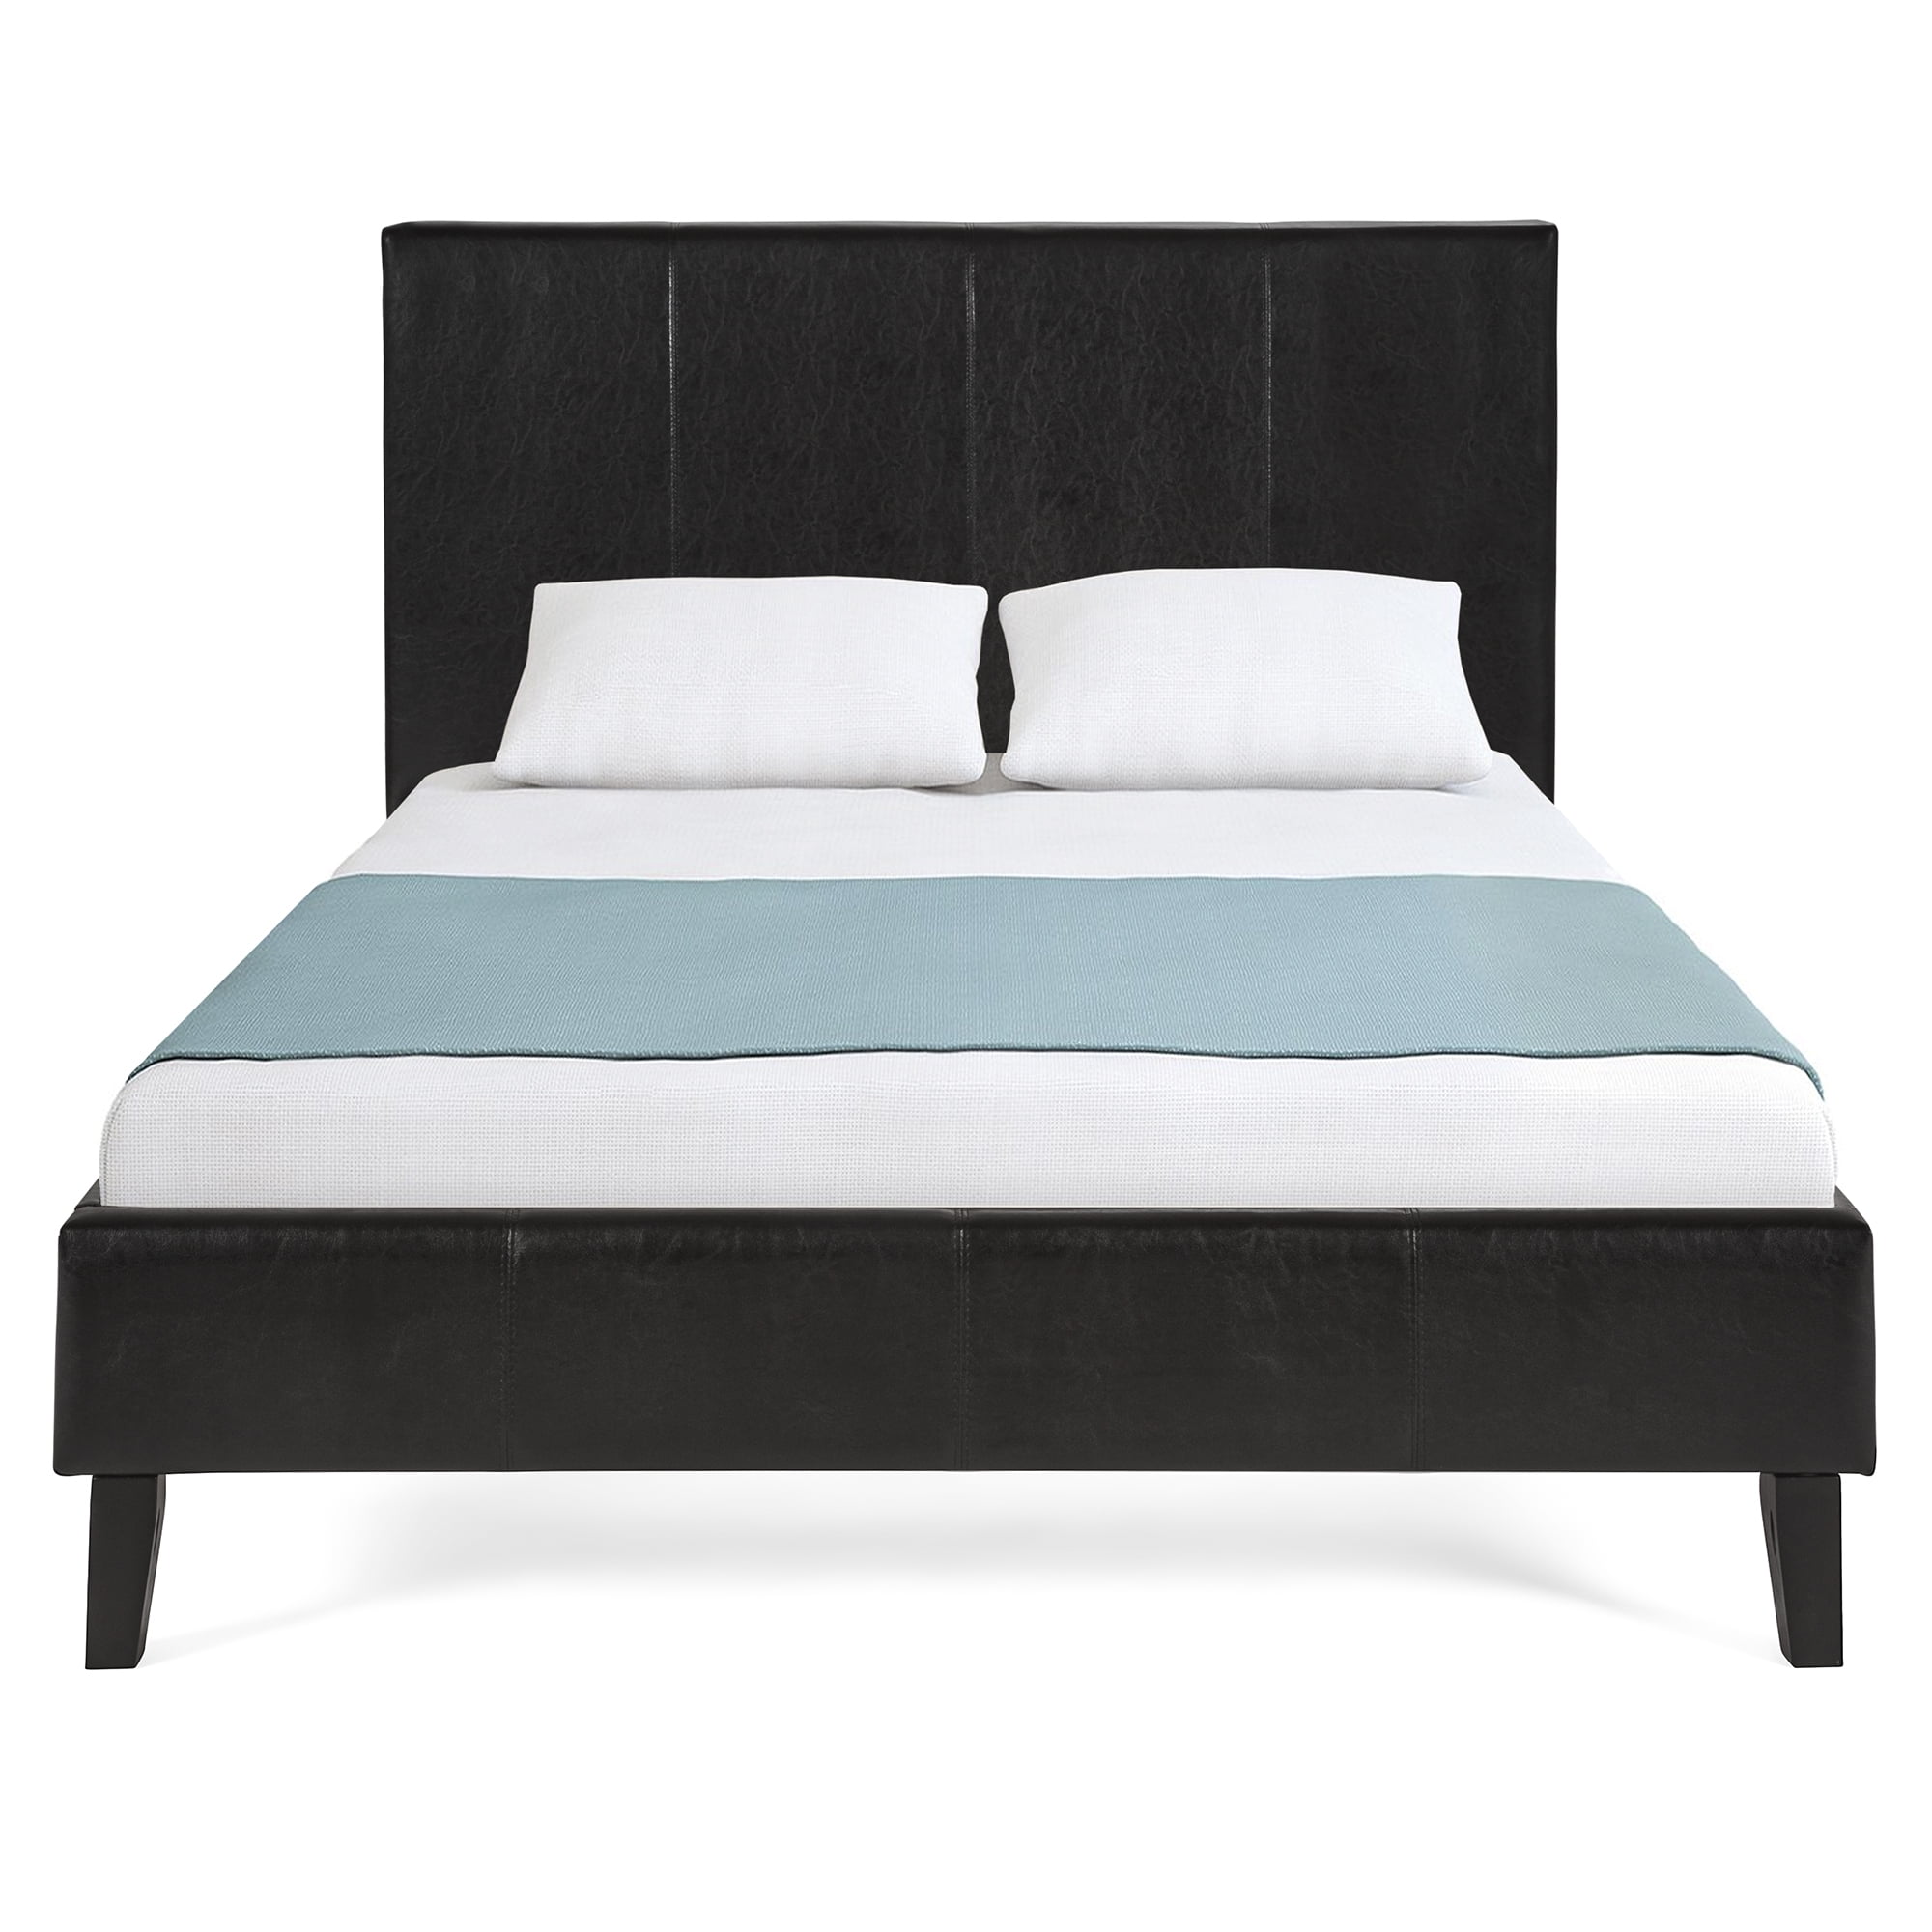 Faux Leather Platform Bed Frame, Low Profile Wooden Bed Frame Queen